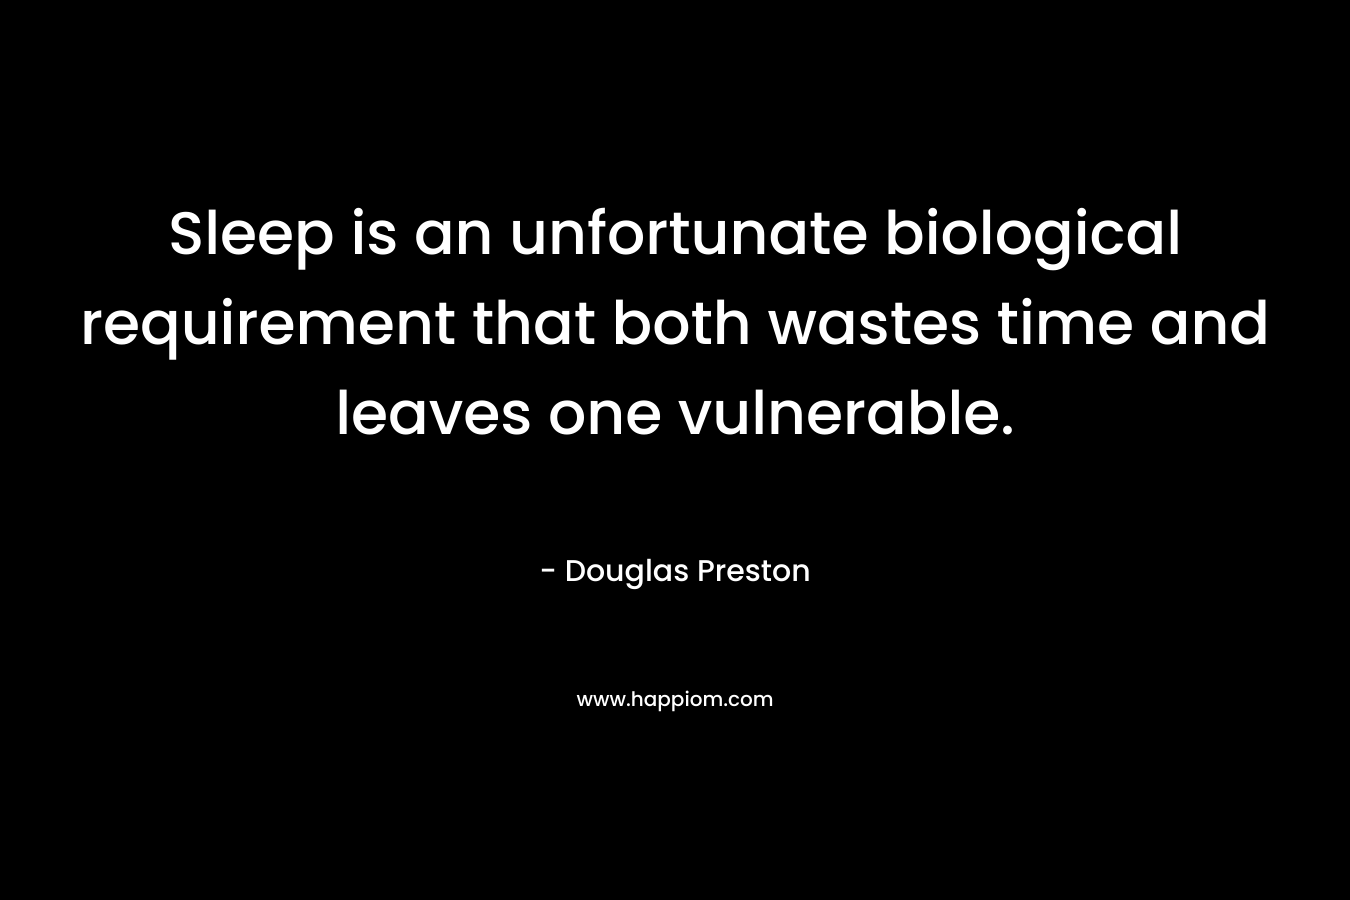 Sleep is an unfortunate biological requirement that both wastes time and leaves one vulnerable. – Douglas Preston